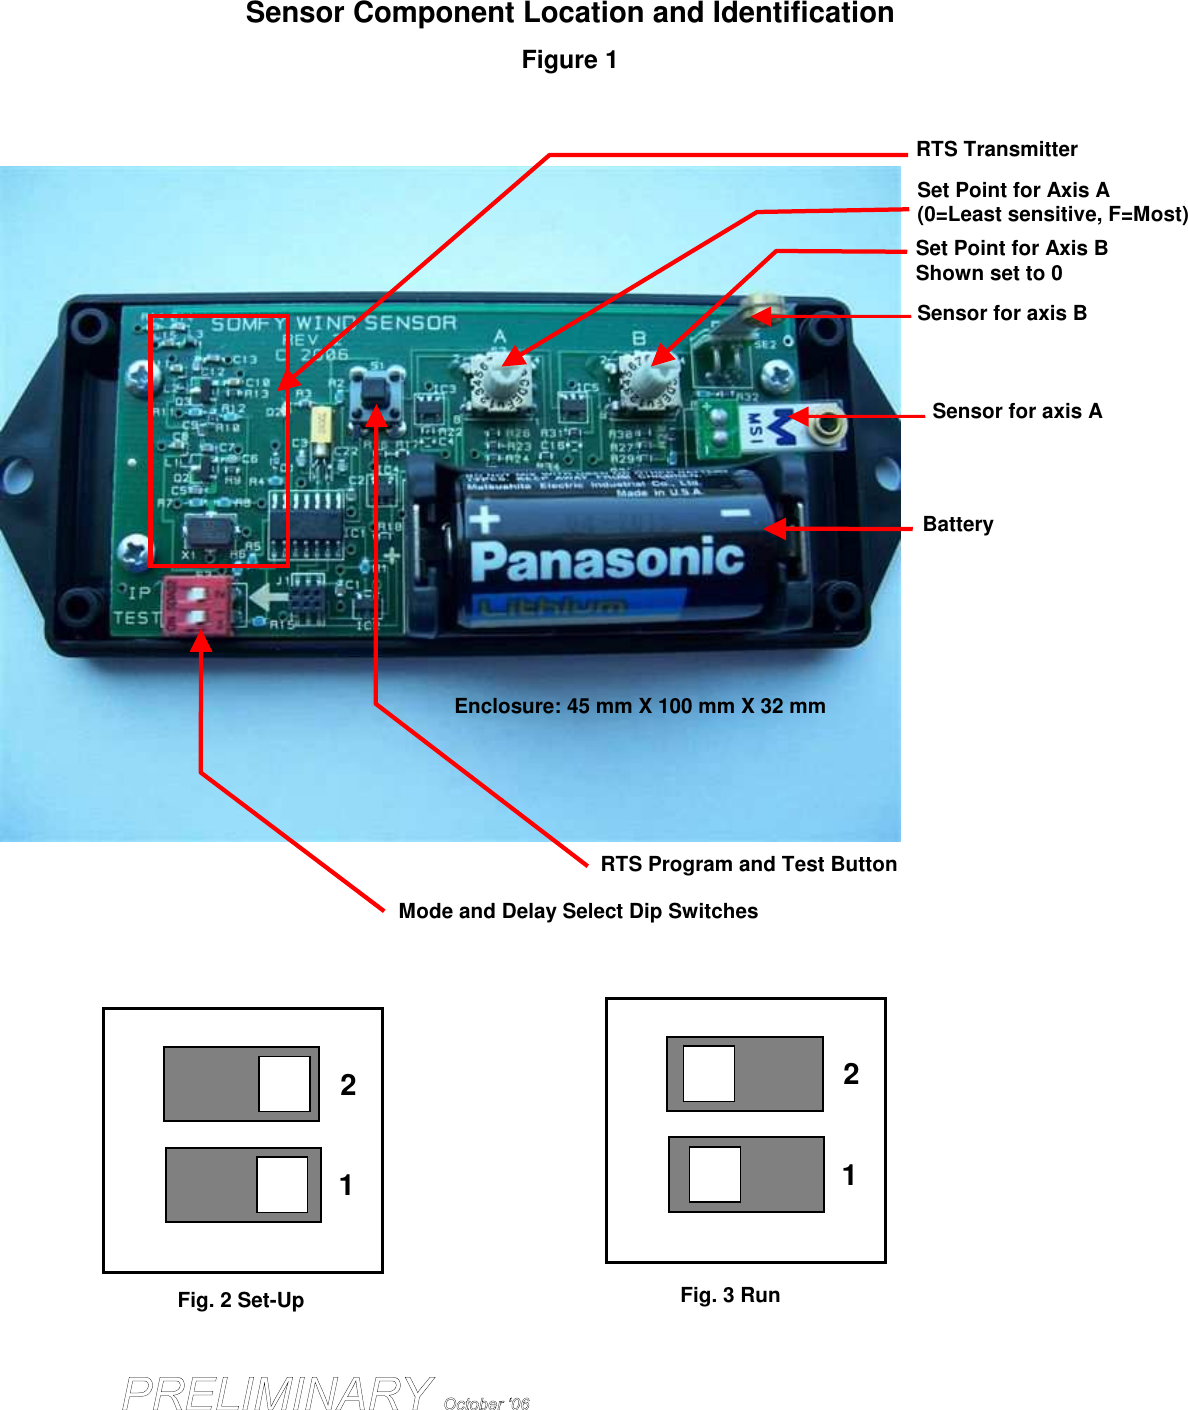 Sensor Component Location and Identification Figure 1  Sensor for axis B Mode and Delay Select Dip Switches RTS Transmitter Set Point for Axis A (0=Least sensitive, F=Most) Set Point for Axis B Shown set to 0 Enclosure: 45 mm X 100 mm X 32 mm Battery RTS Program and Test Button Sensor for axis A 1 2 Fig. 2 Set-Up 1 2 Fig. 3 Run 